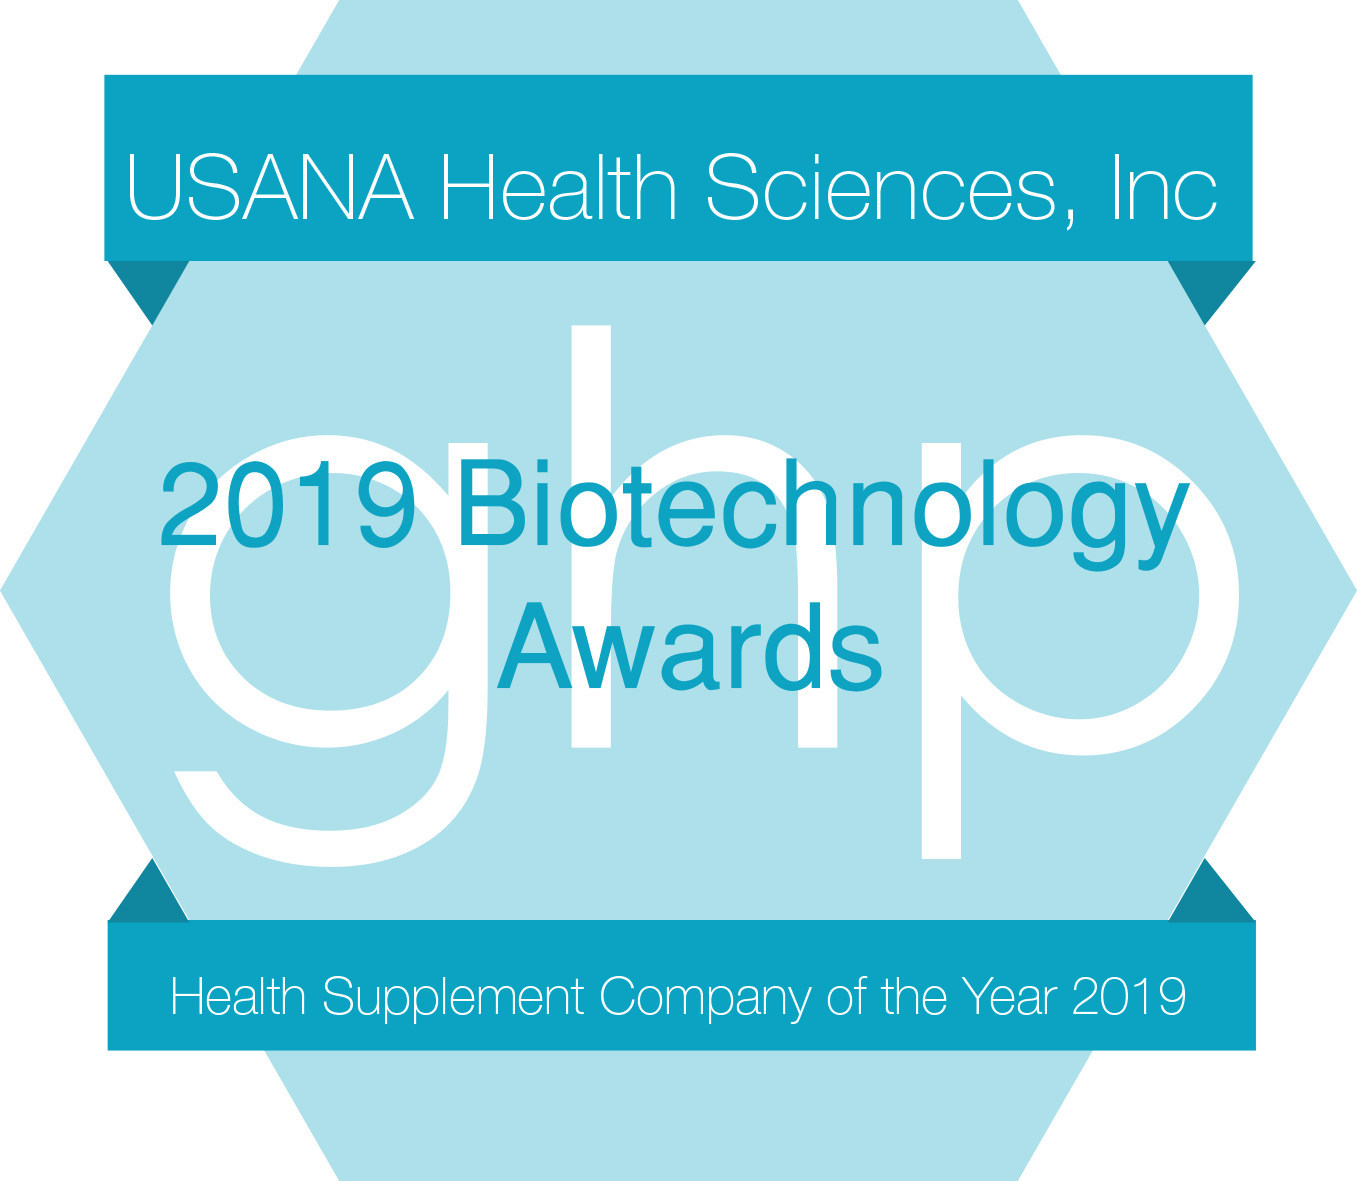 USANA wins the 2019 GHP Biotechnology award for Health Supplement Company of the Year